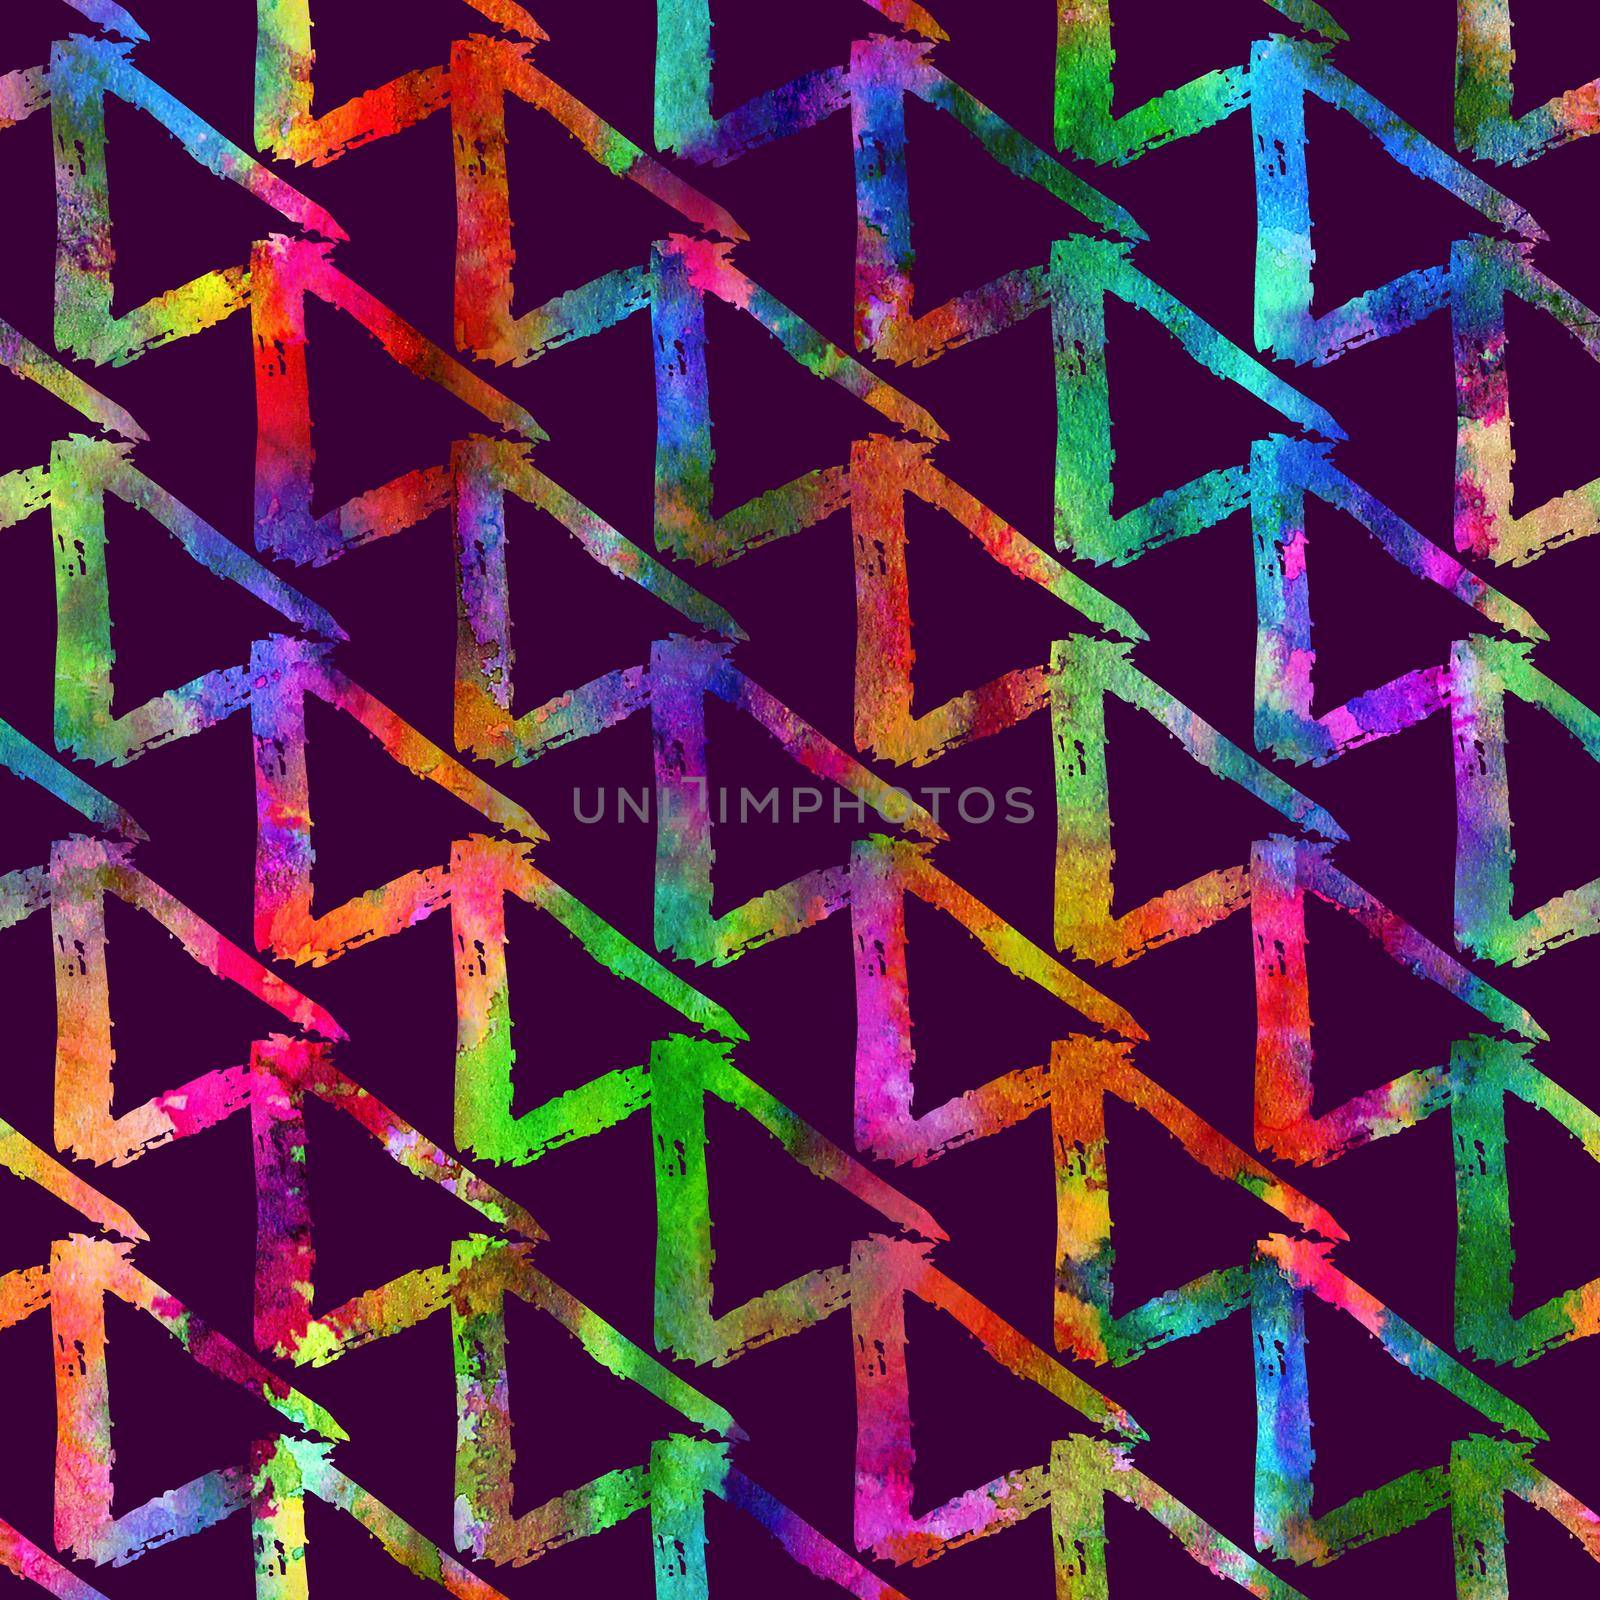 seamless pattern brush colorful triangle. Rainbow color on violet background. Hand painted grange texture. Ink geometric elements. Fashion modern style. Endless fantasy plaid fabric print. Watercolor by DesignAB